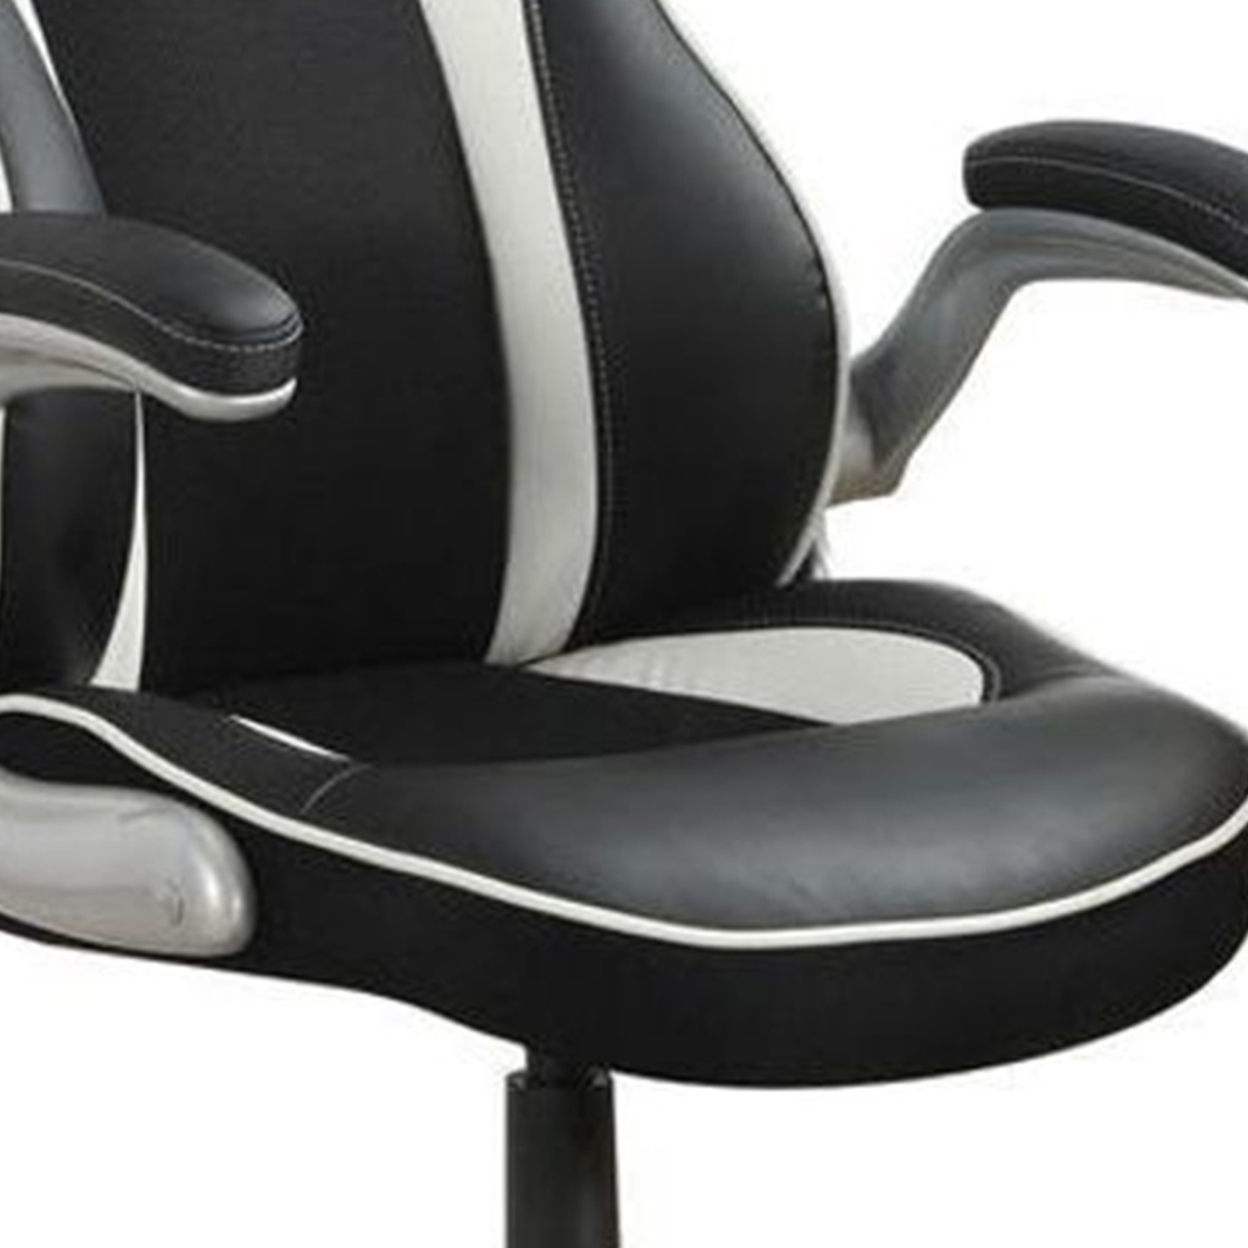 Fancy Executive High Back Leather Chair, Black And White- Saltoro Sherpi